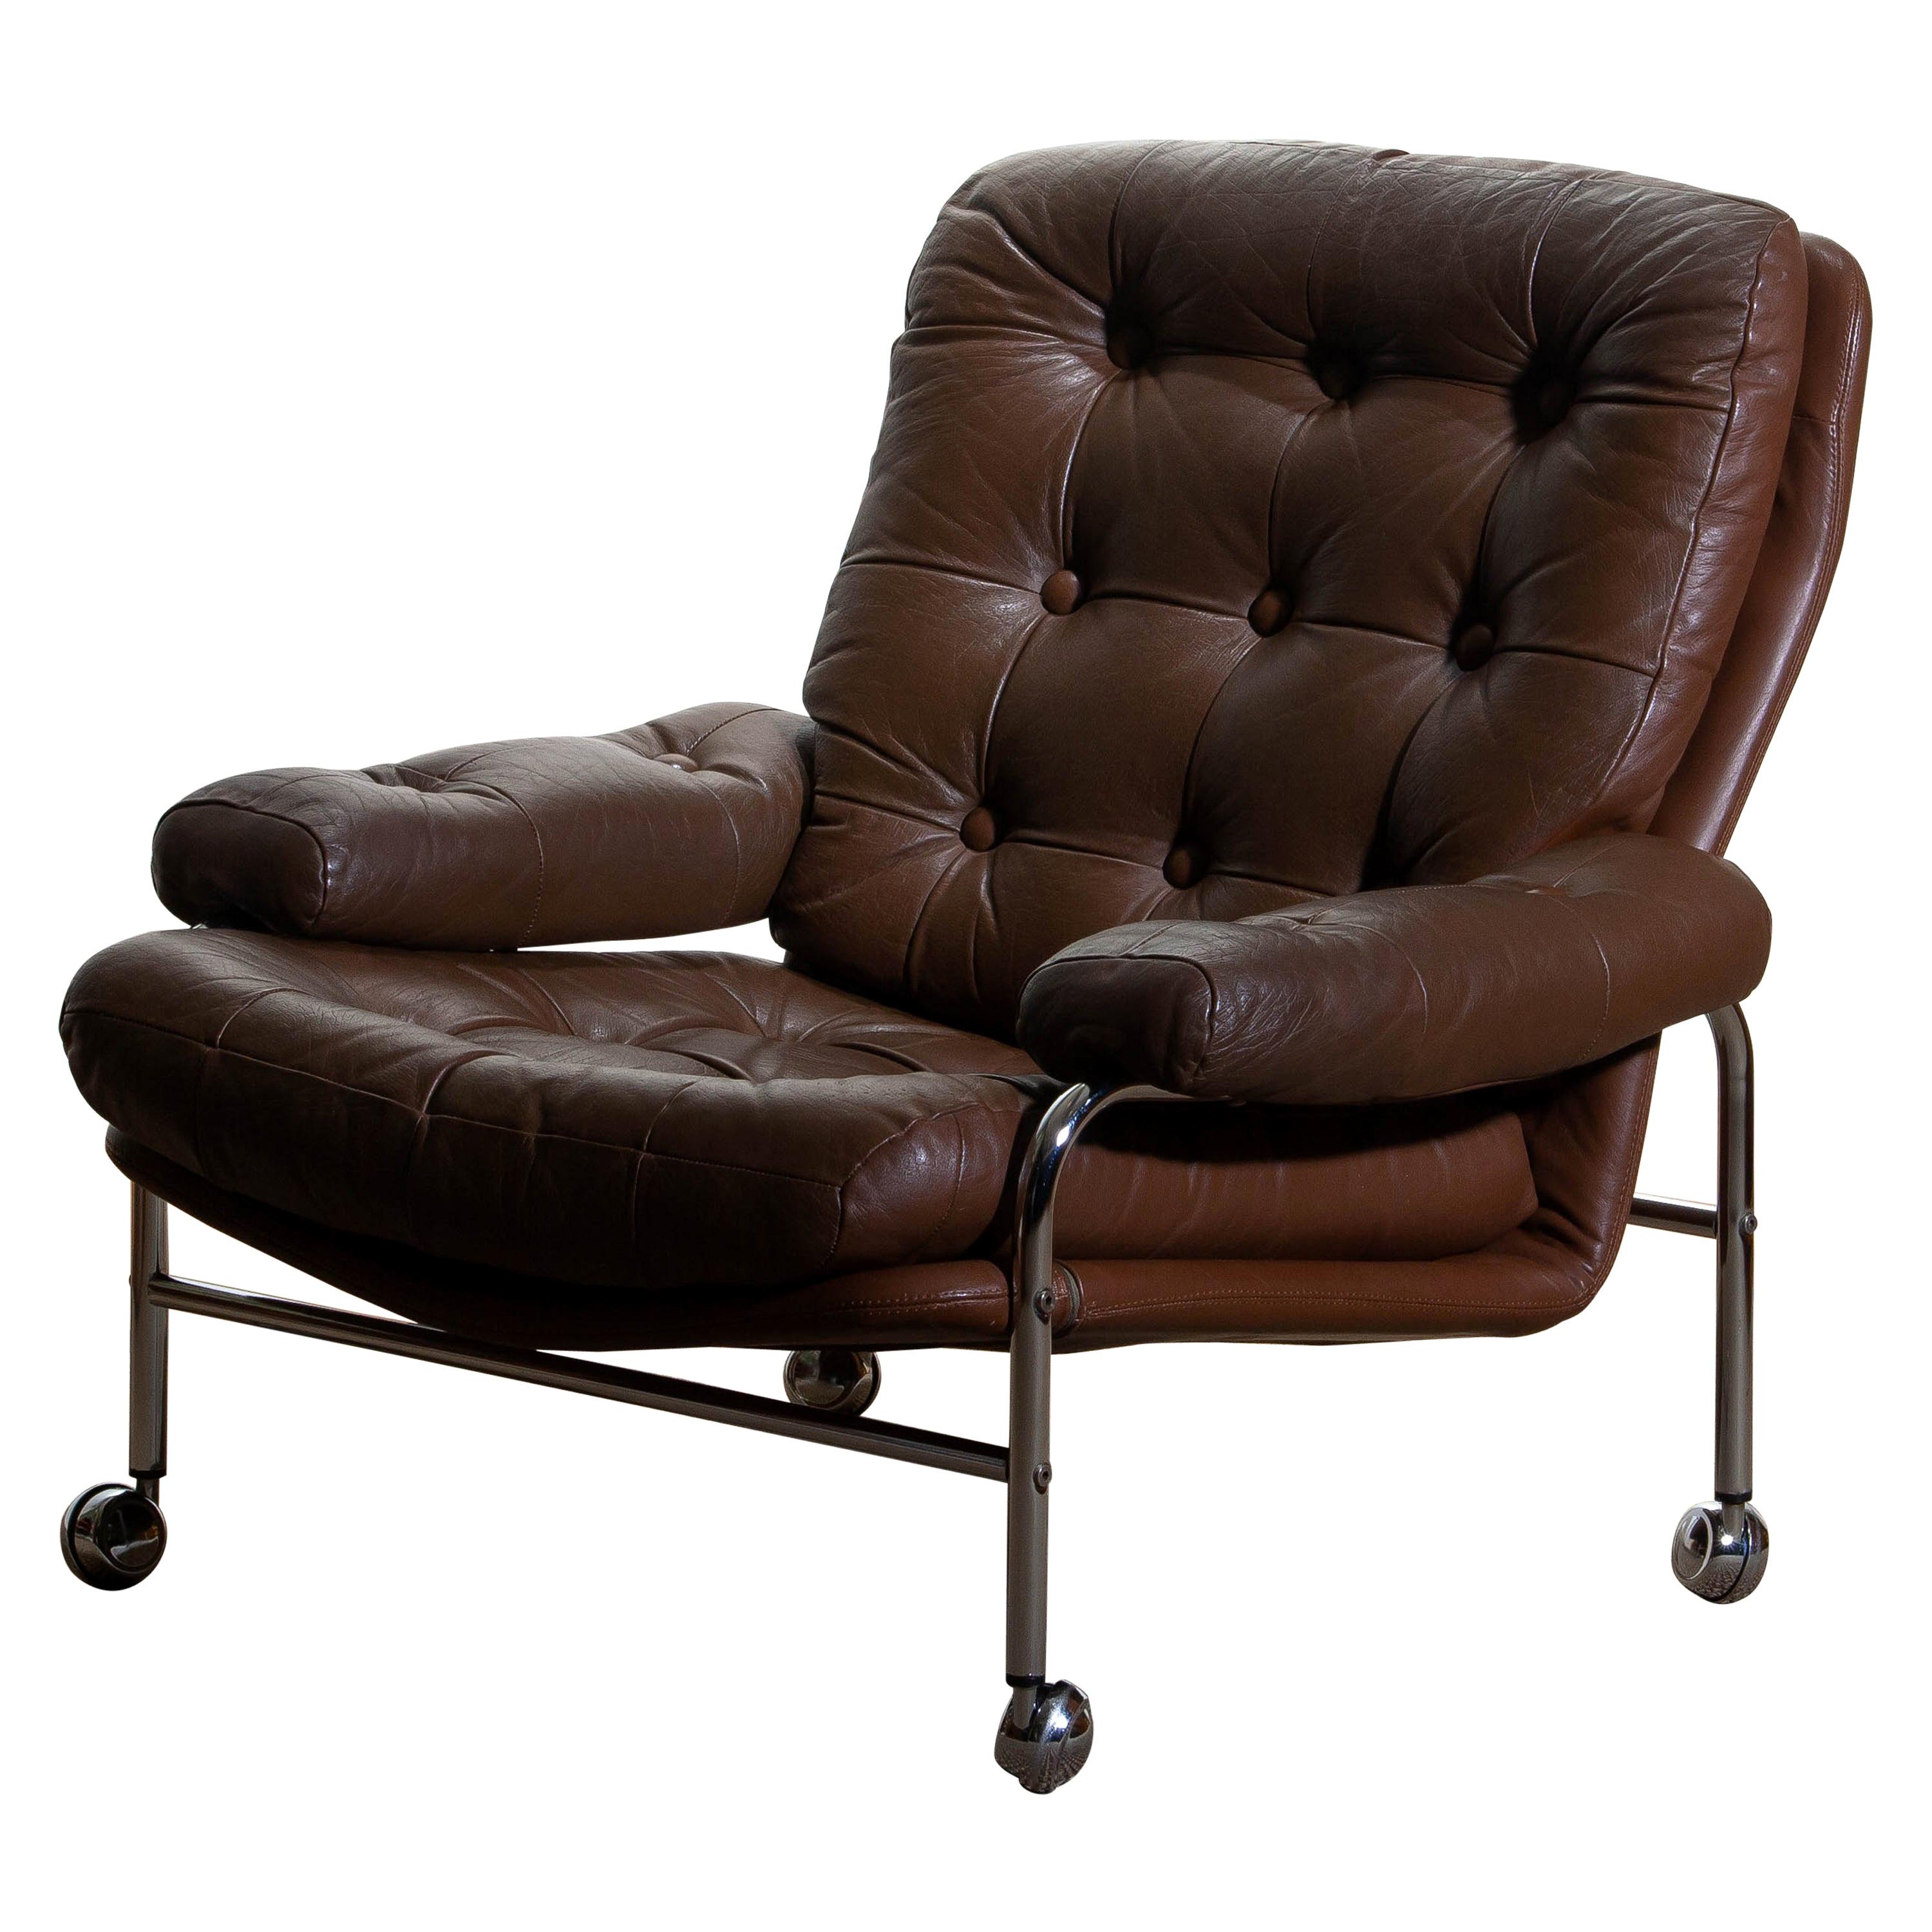 Extremely comfortable easy or lounge chair made by Scapa Rydaholm, Sweden.
This, typical Scandinavian chair is upholstered with brown leather based on a chromed metal frame.
All in perfect condition.

 